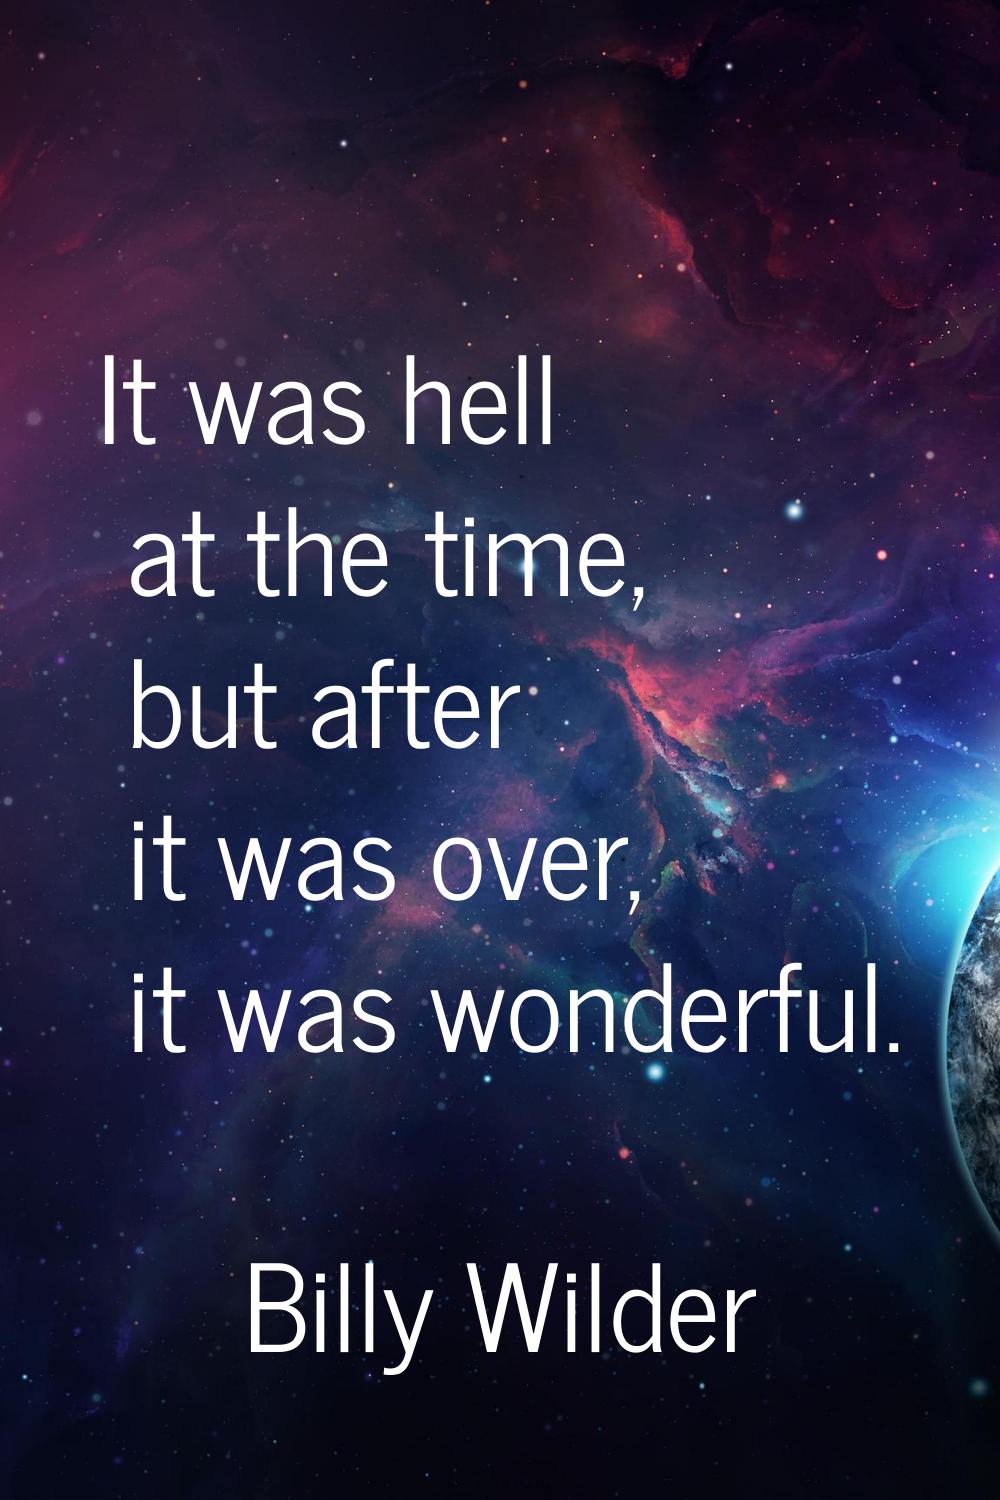 It was hell at the time, but after it was over, it was wonderful.